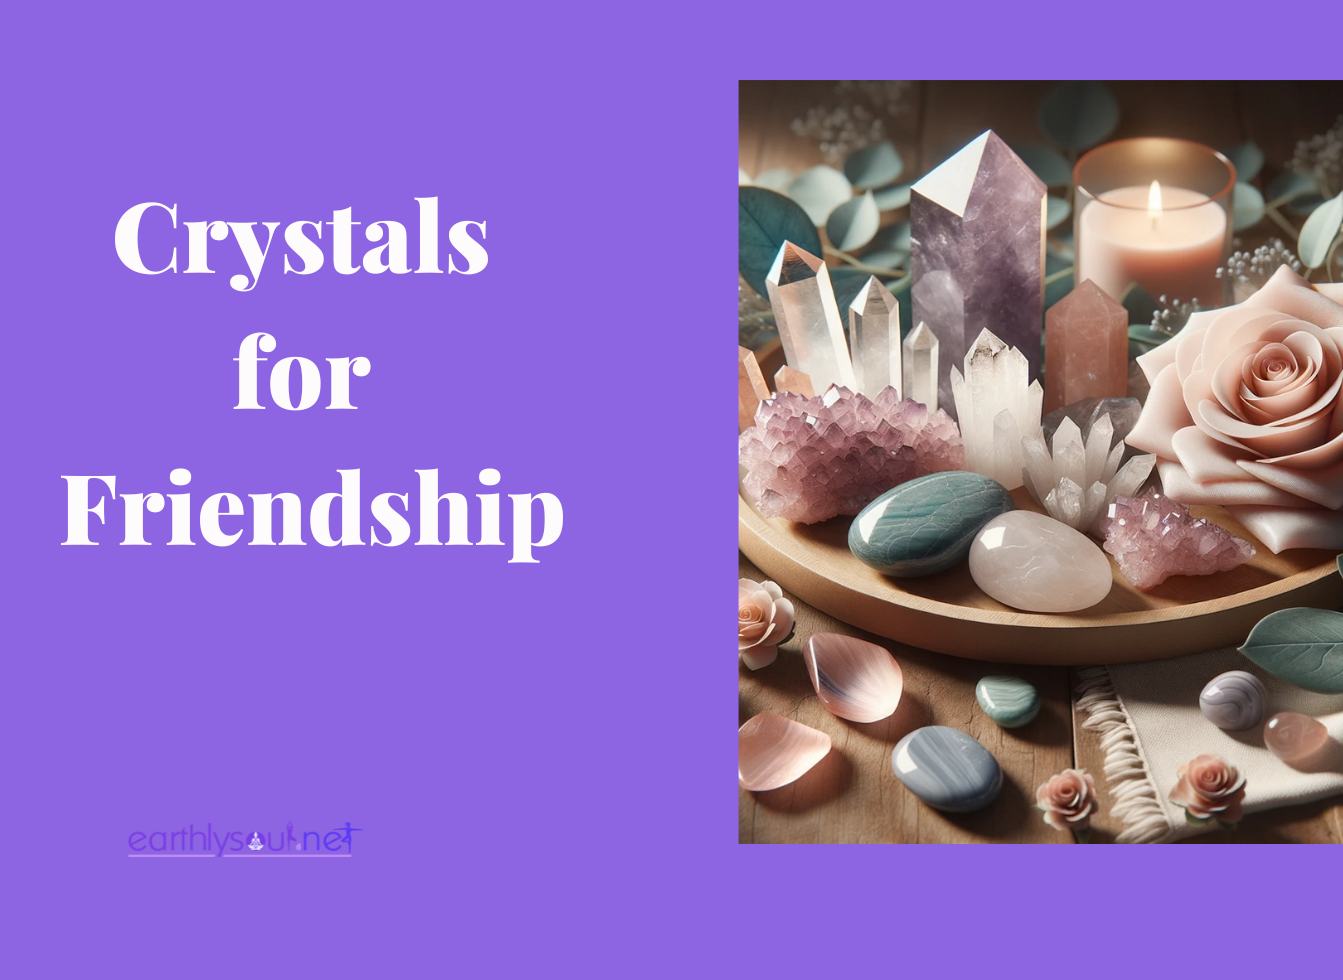 Crystals for friendship featured image